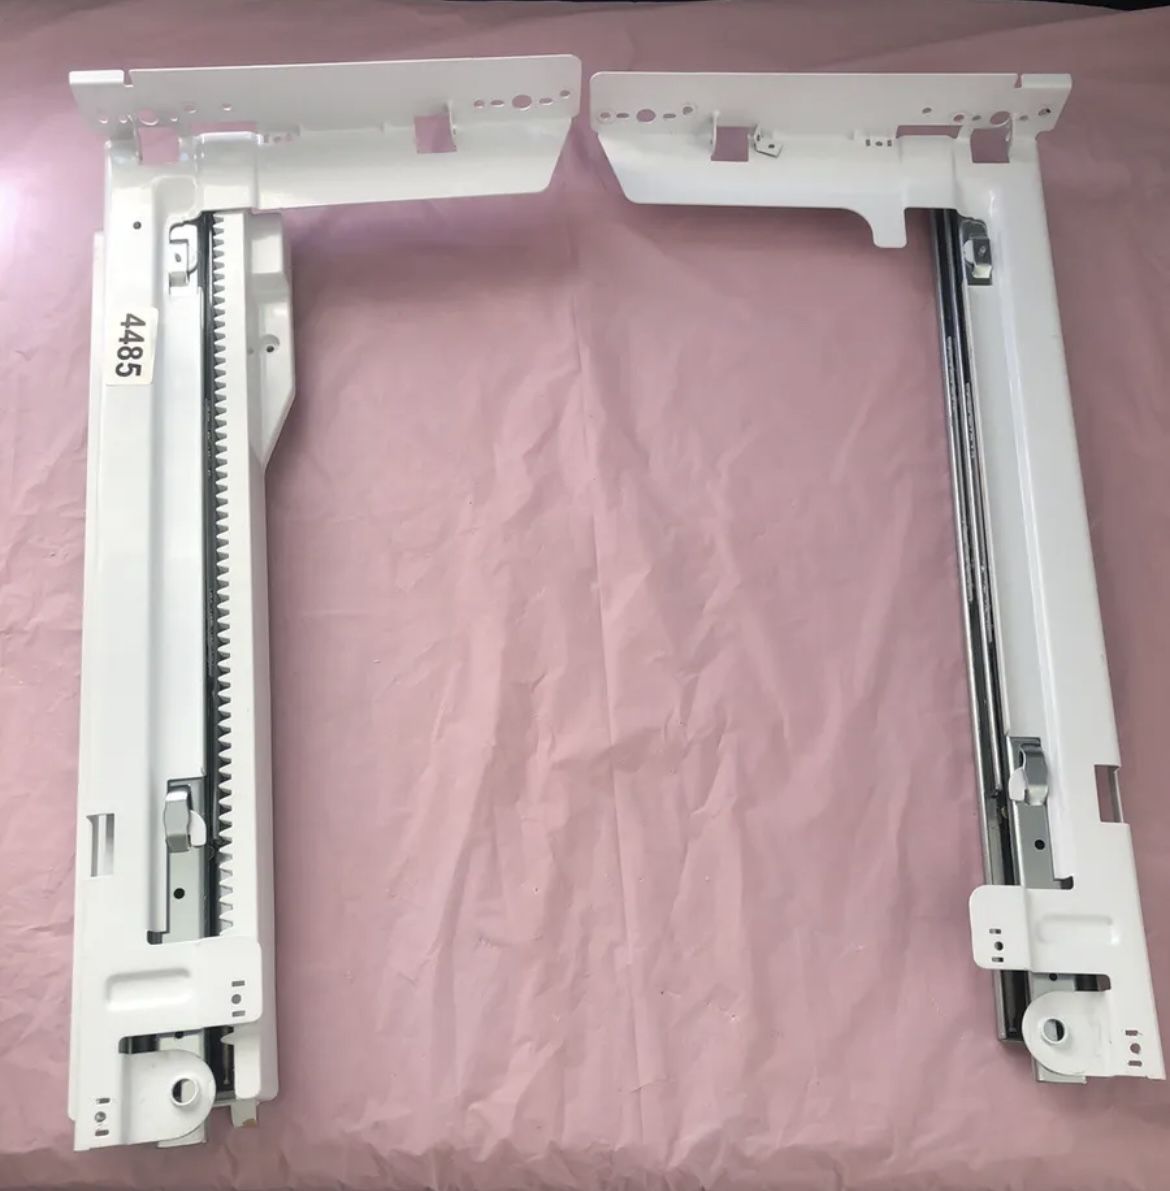 OEM LG Refrigerator Freezer Drawer Rail Left & Right Part # MCD(contact info removed)1,MCD(contact info removed)2